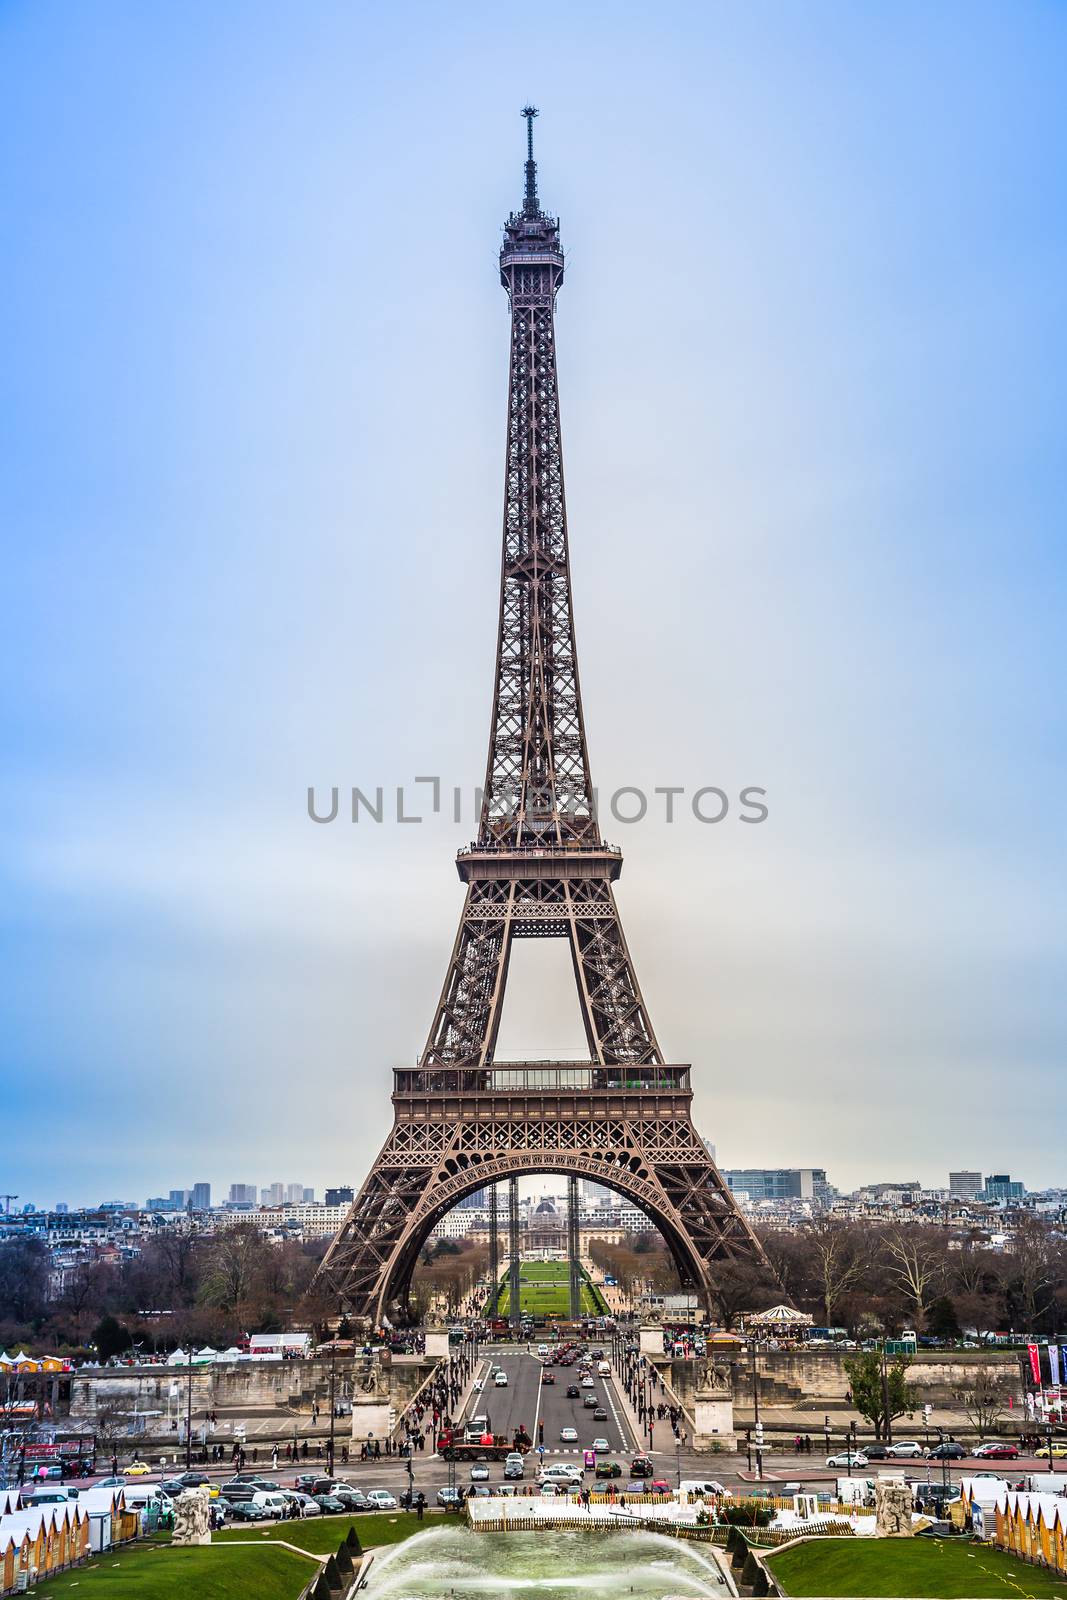 Eiffel Tower in Paris France on a beautiful sunny day